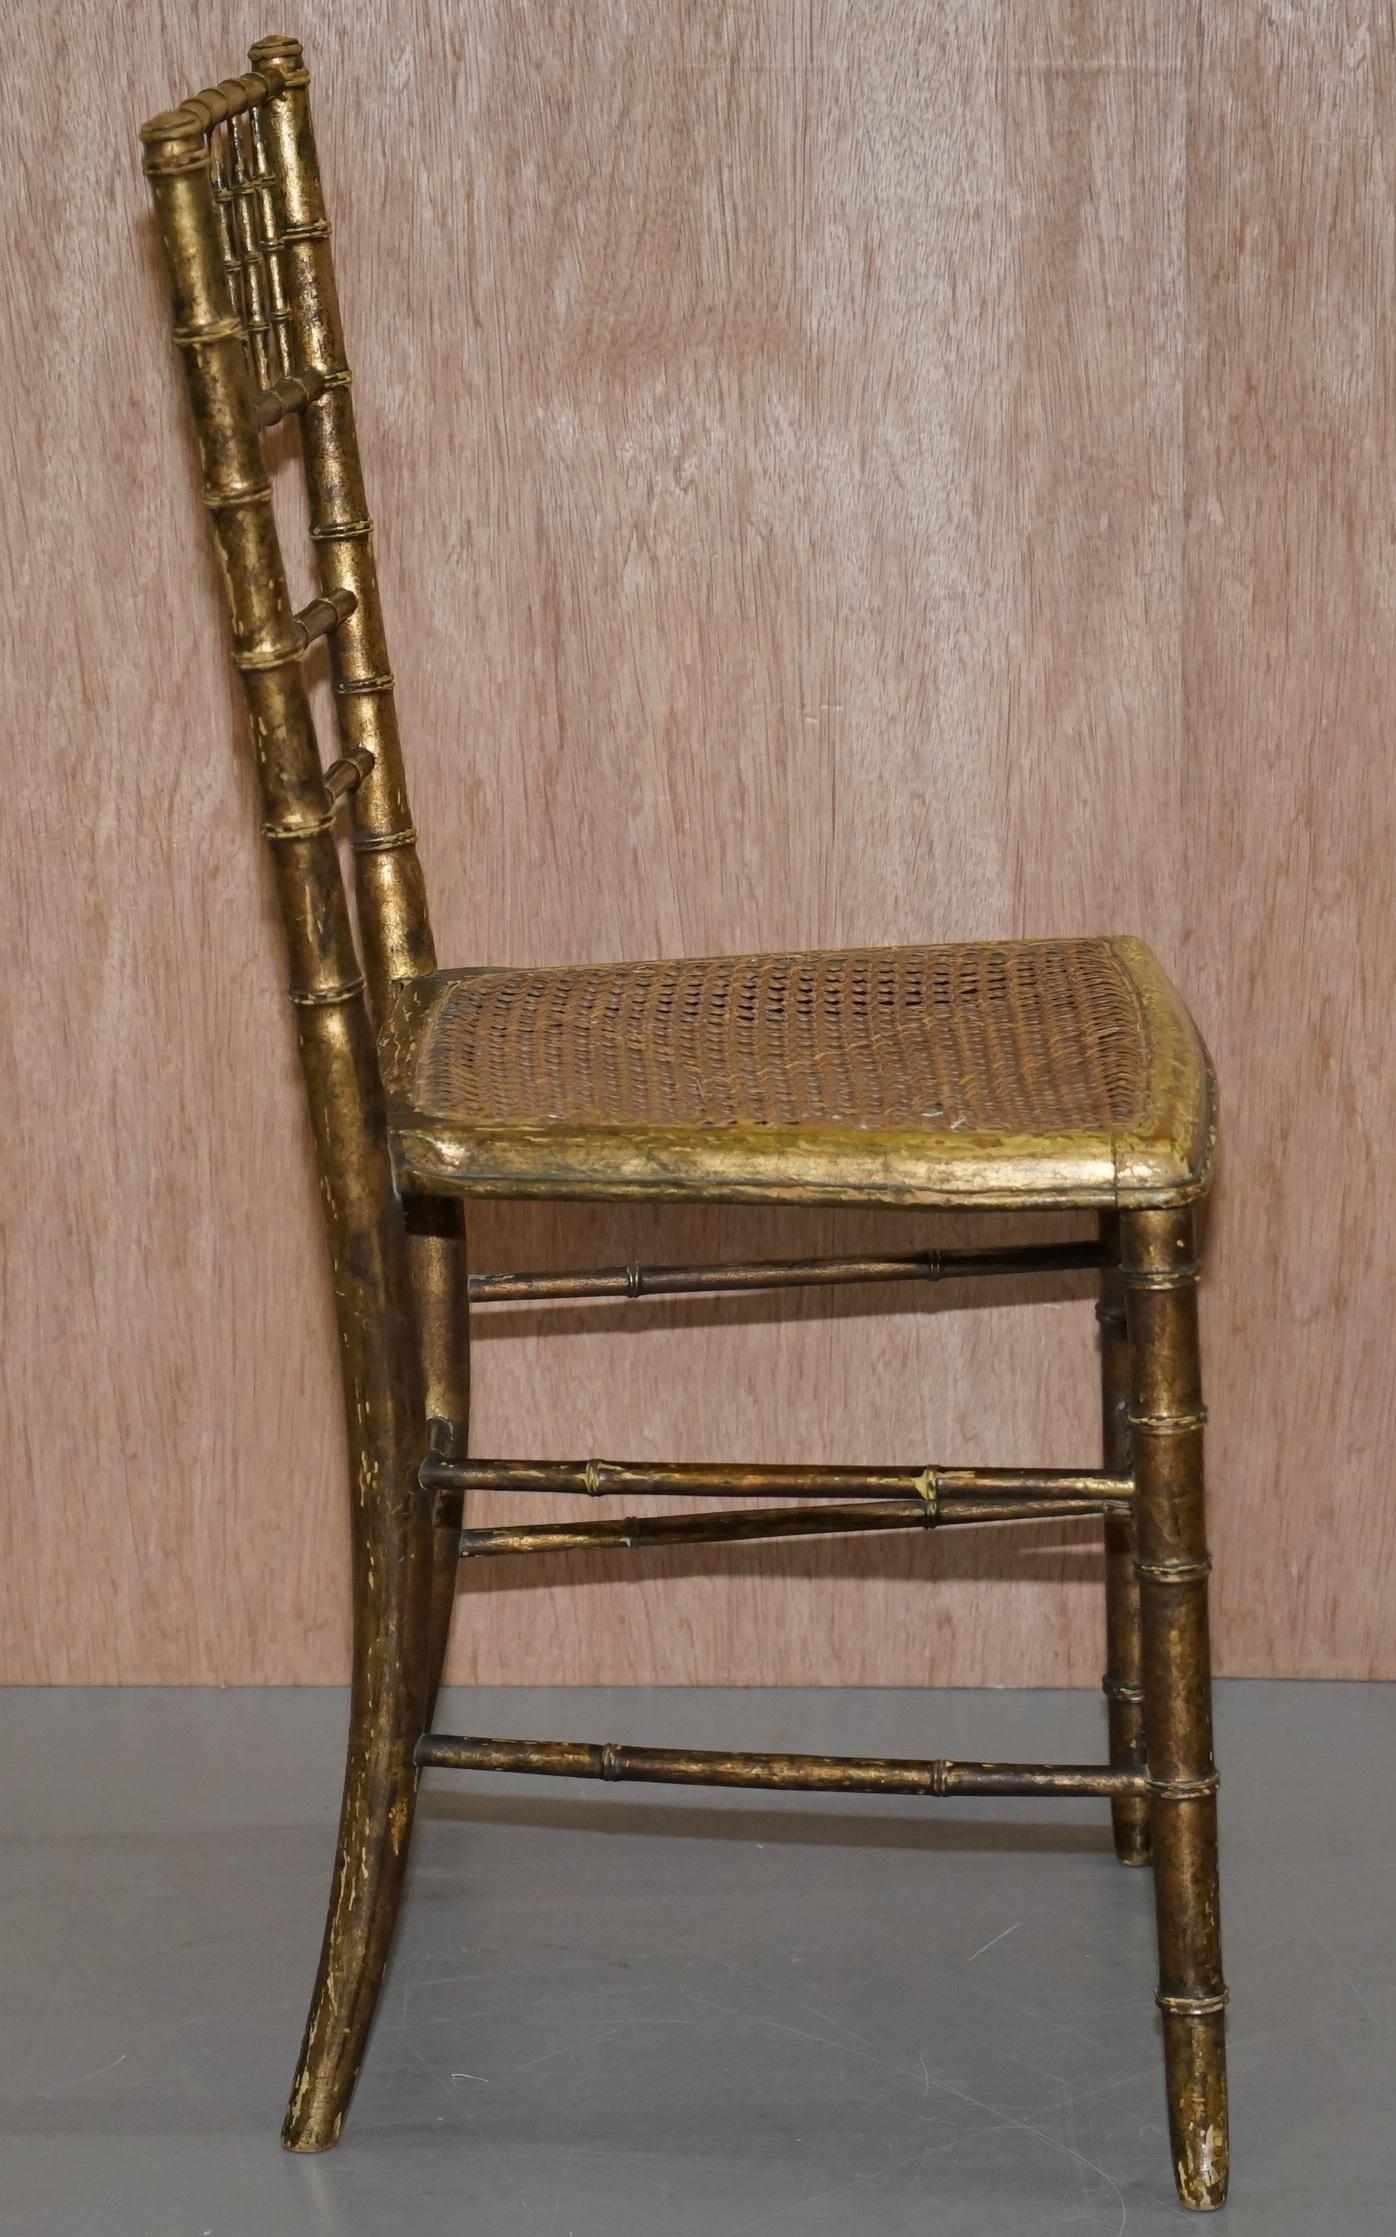 Pair of Original Giltwood Famboo Regency Bergere Chairs with Period Gold Gilding For Sale 15